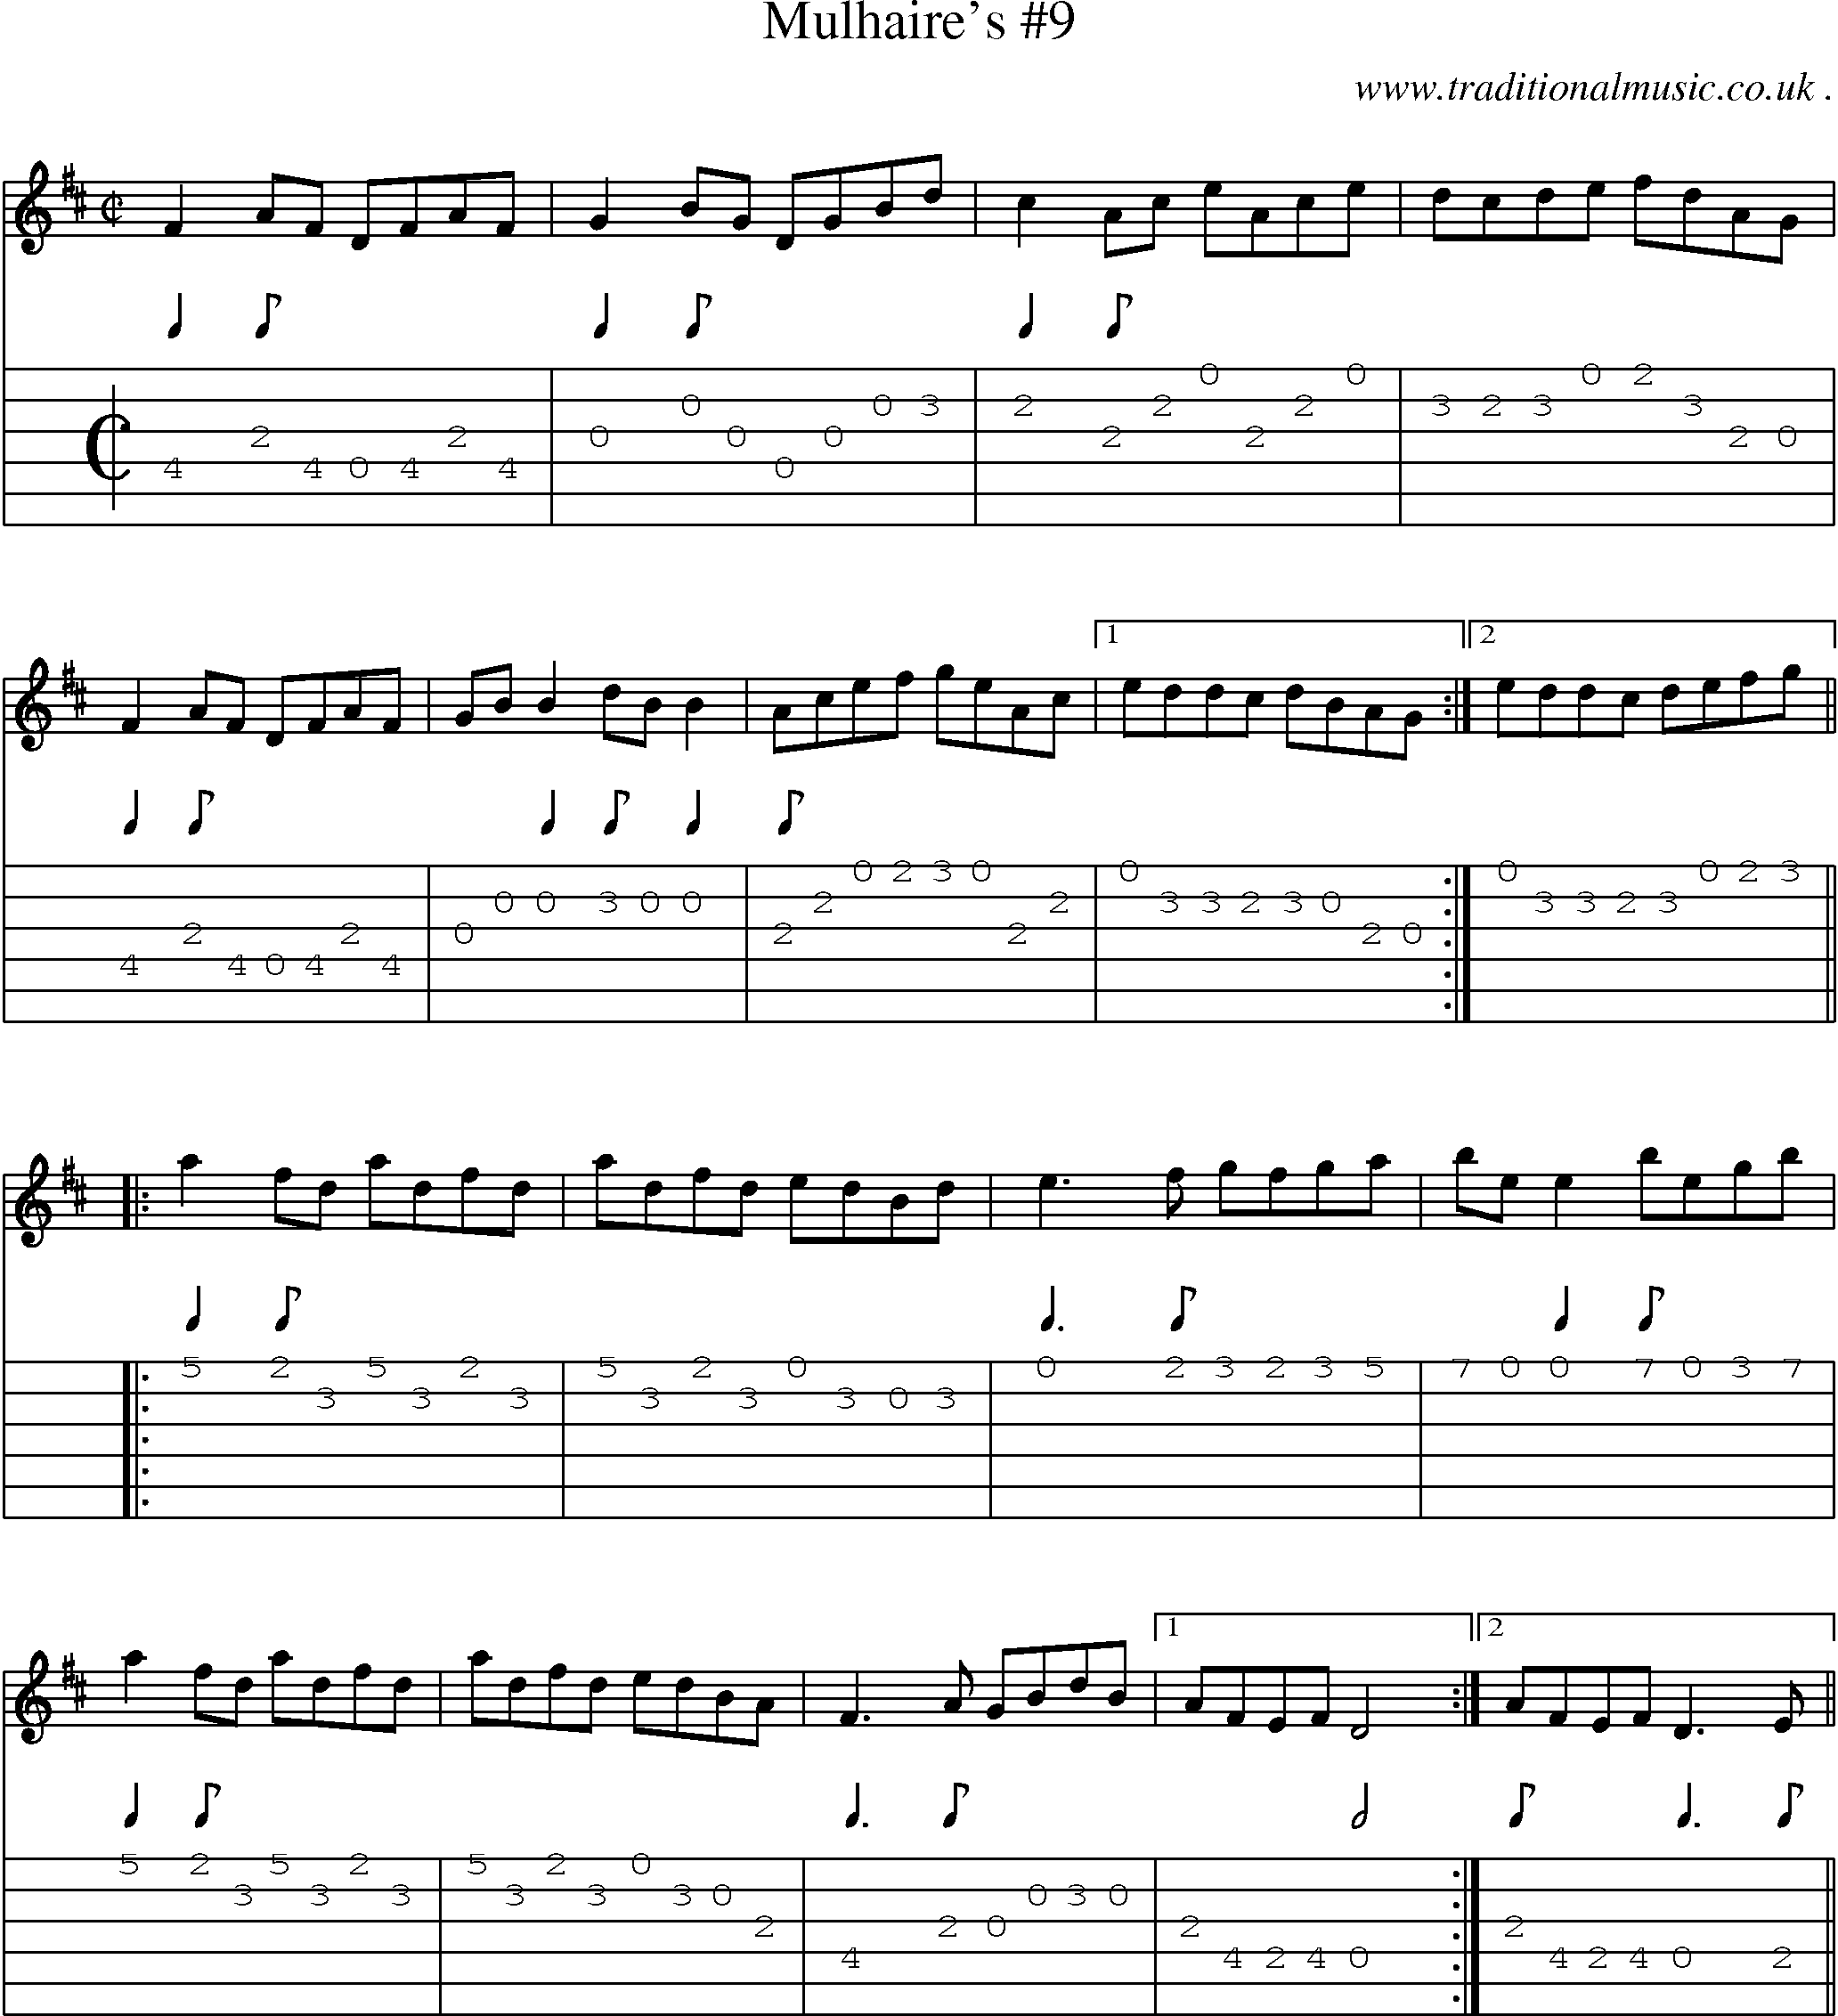 Sheet-Music and Guitar Tabs for Mulhaires 9